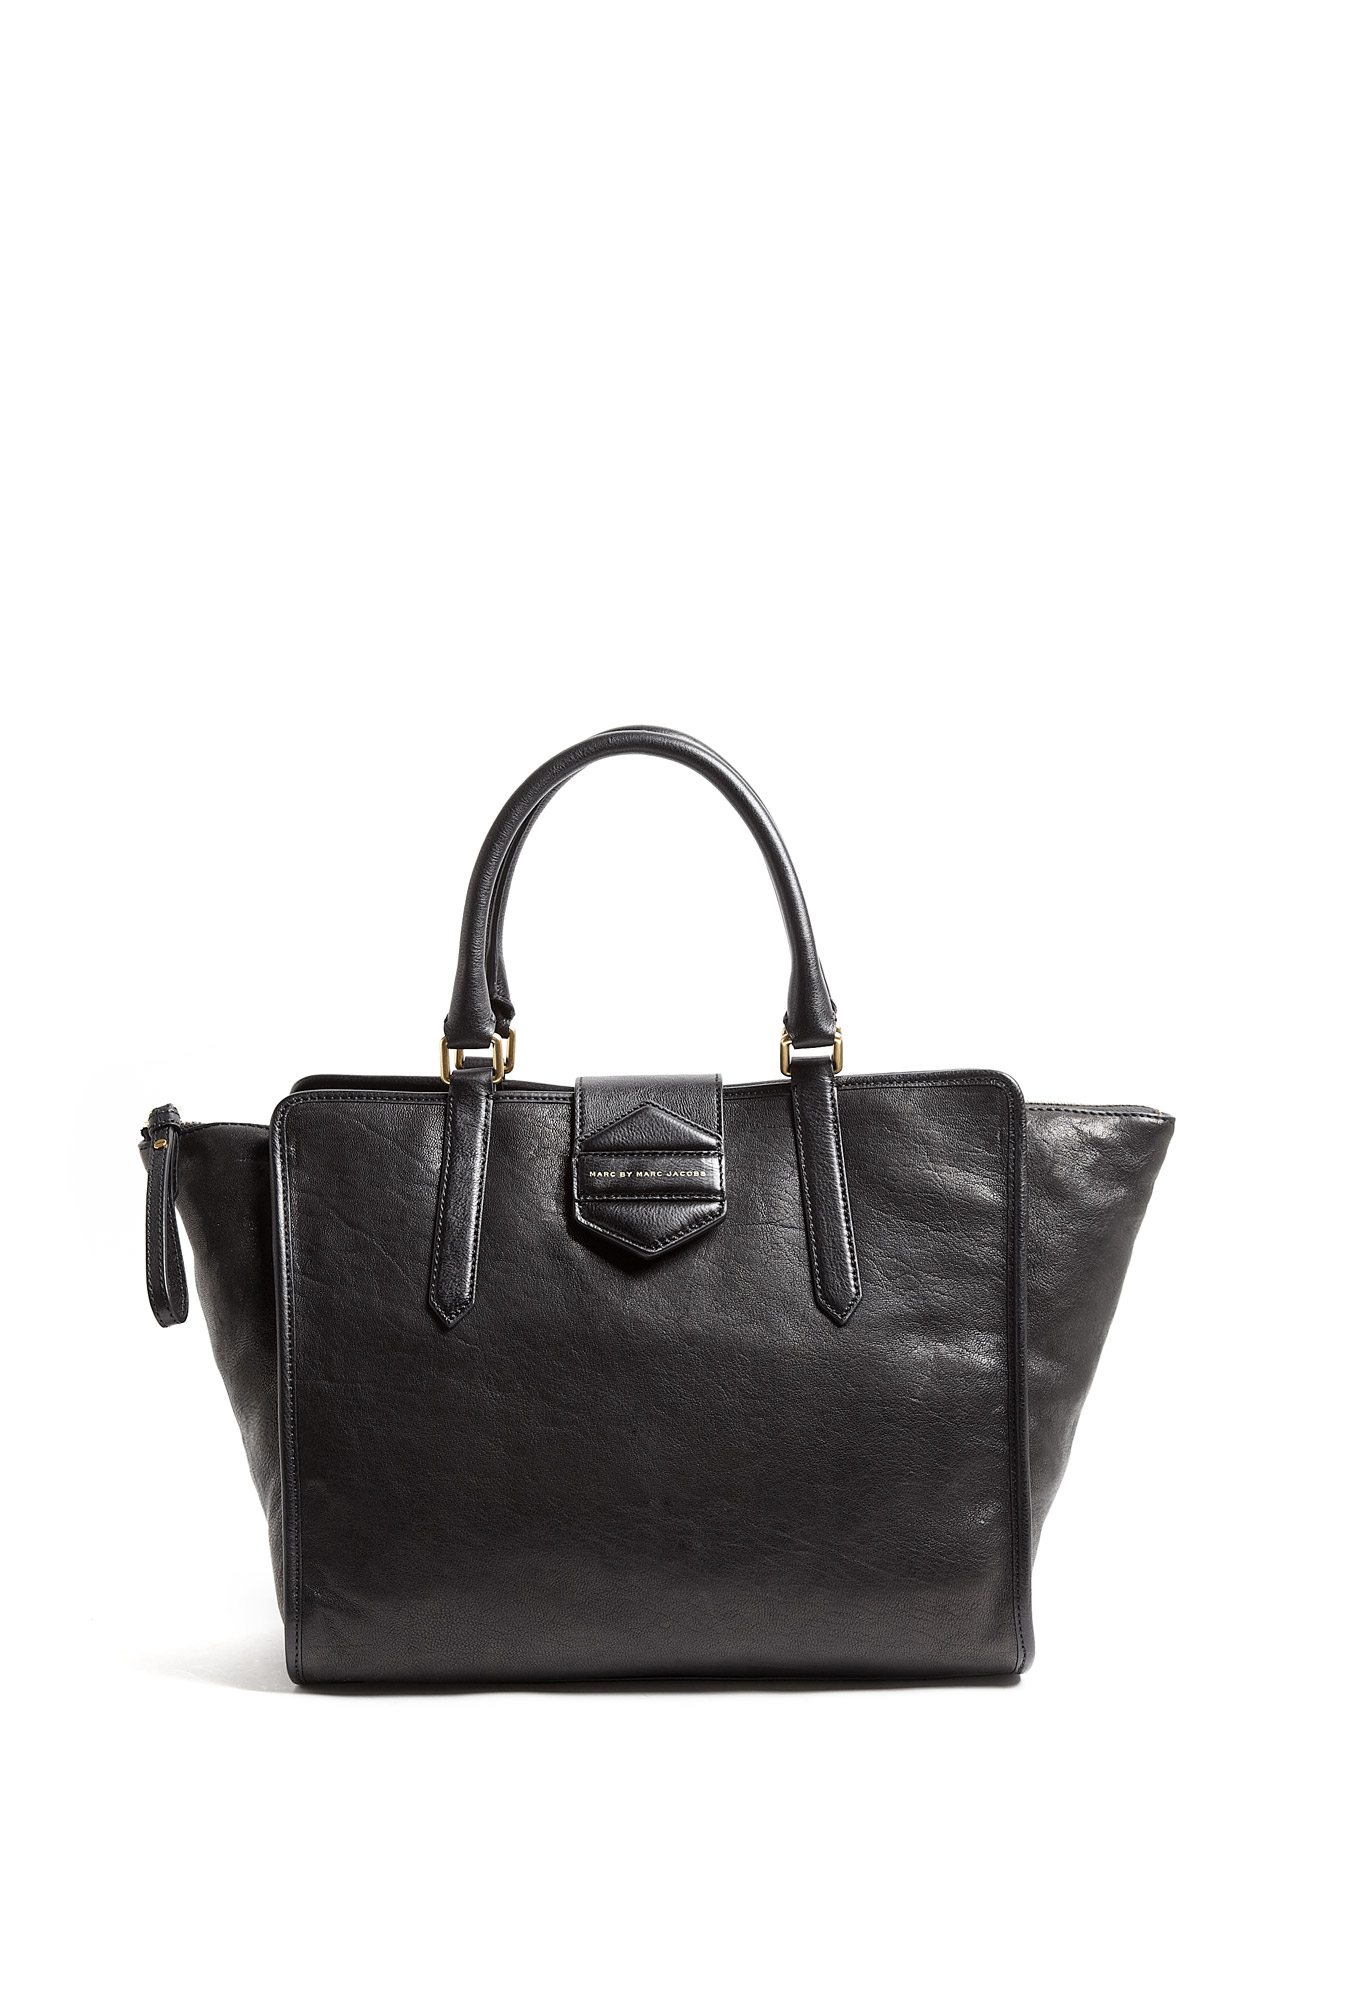 Marc By Marc Jacobs Flipping Out Large Leather Tote Bag in Black | Lyst